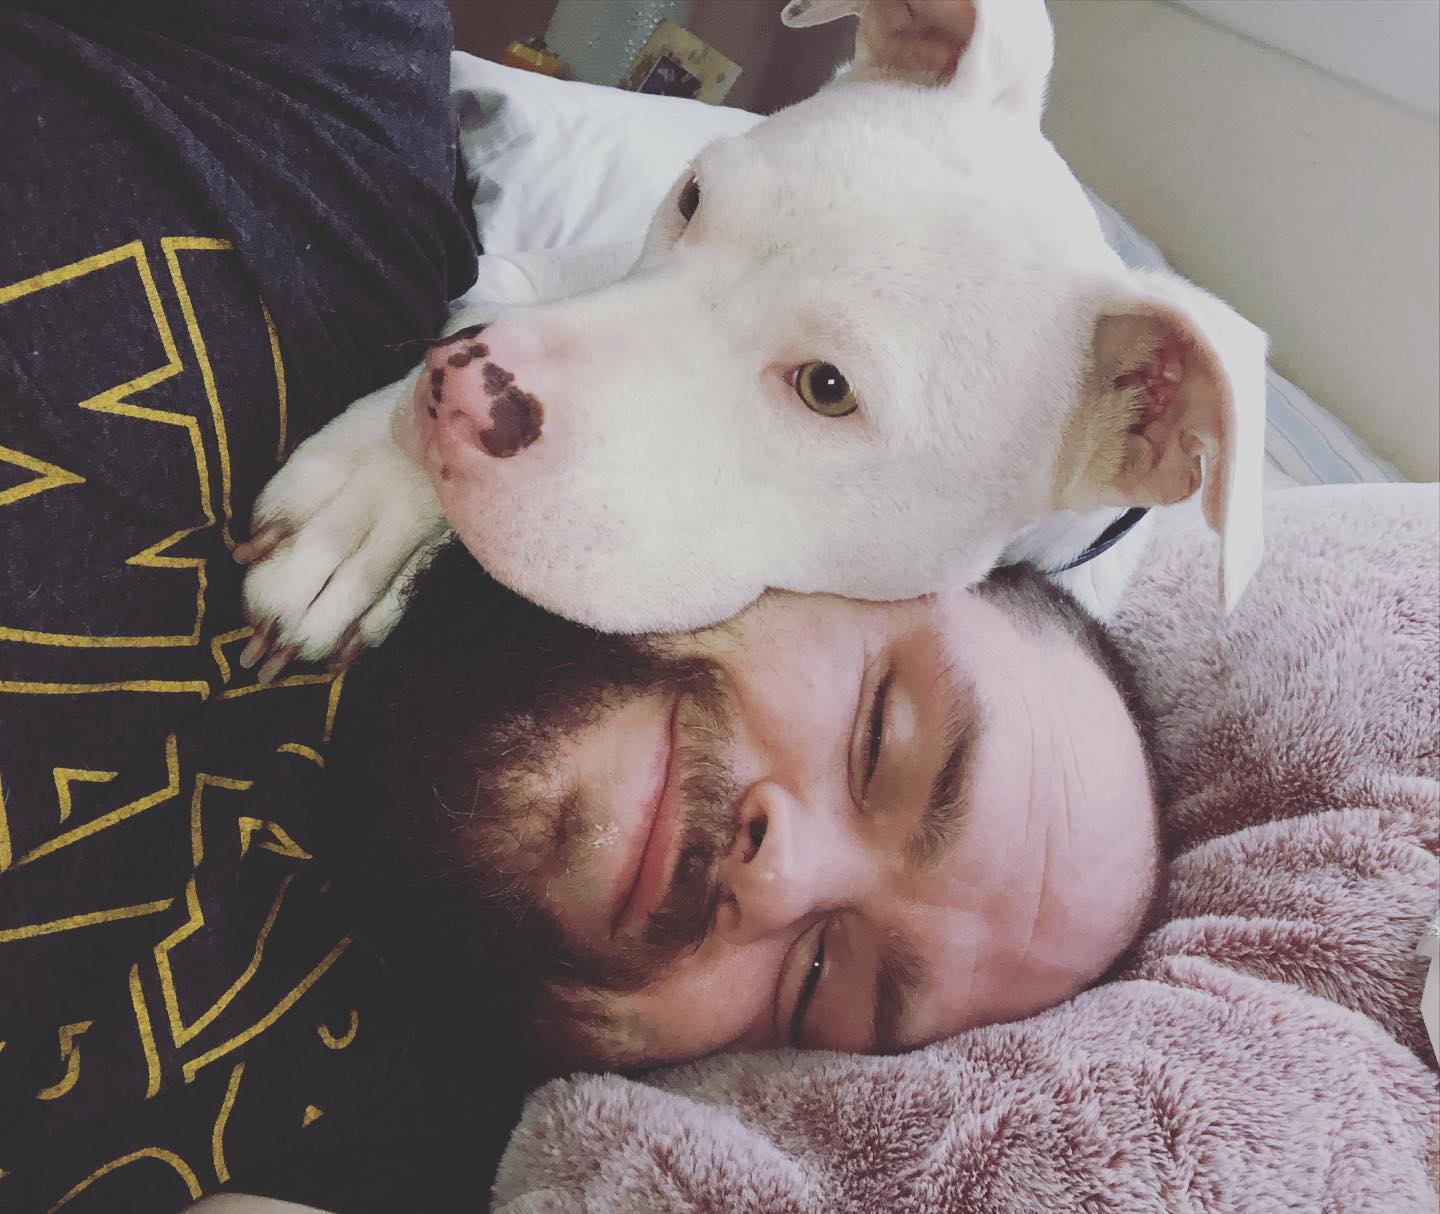 man cuddling with his dog on bed